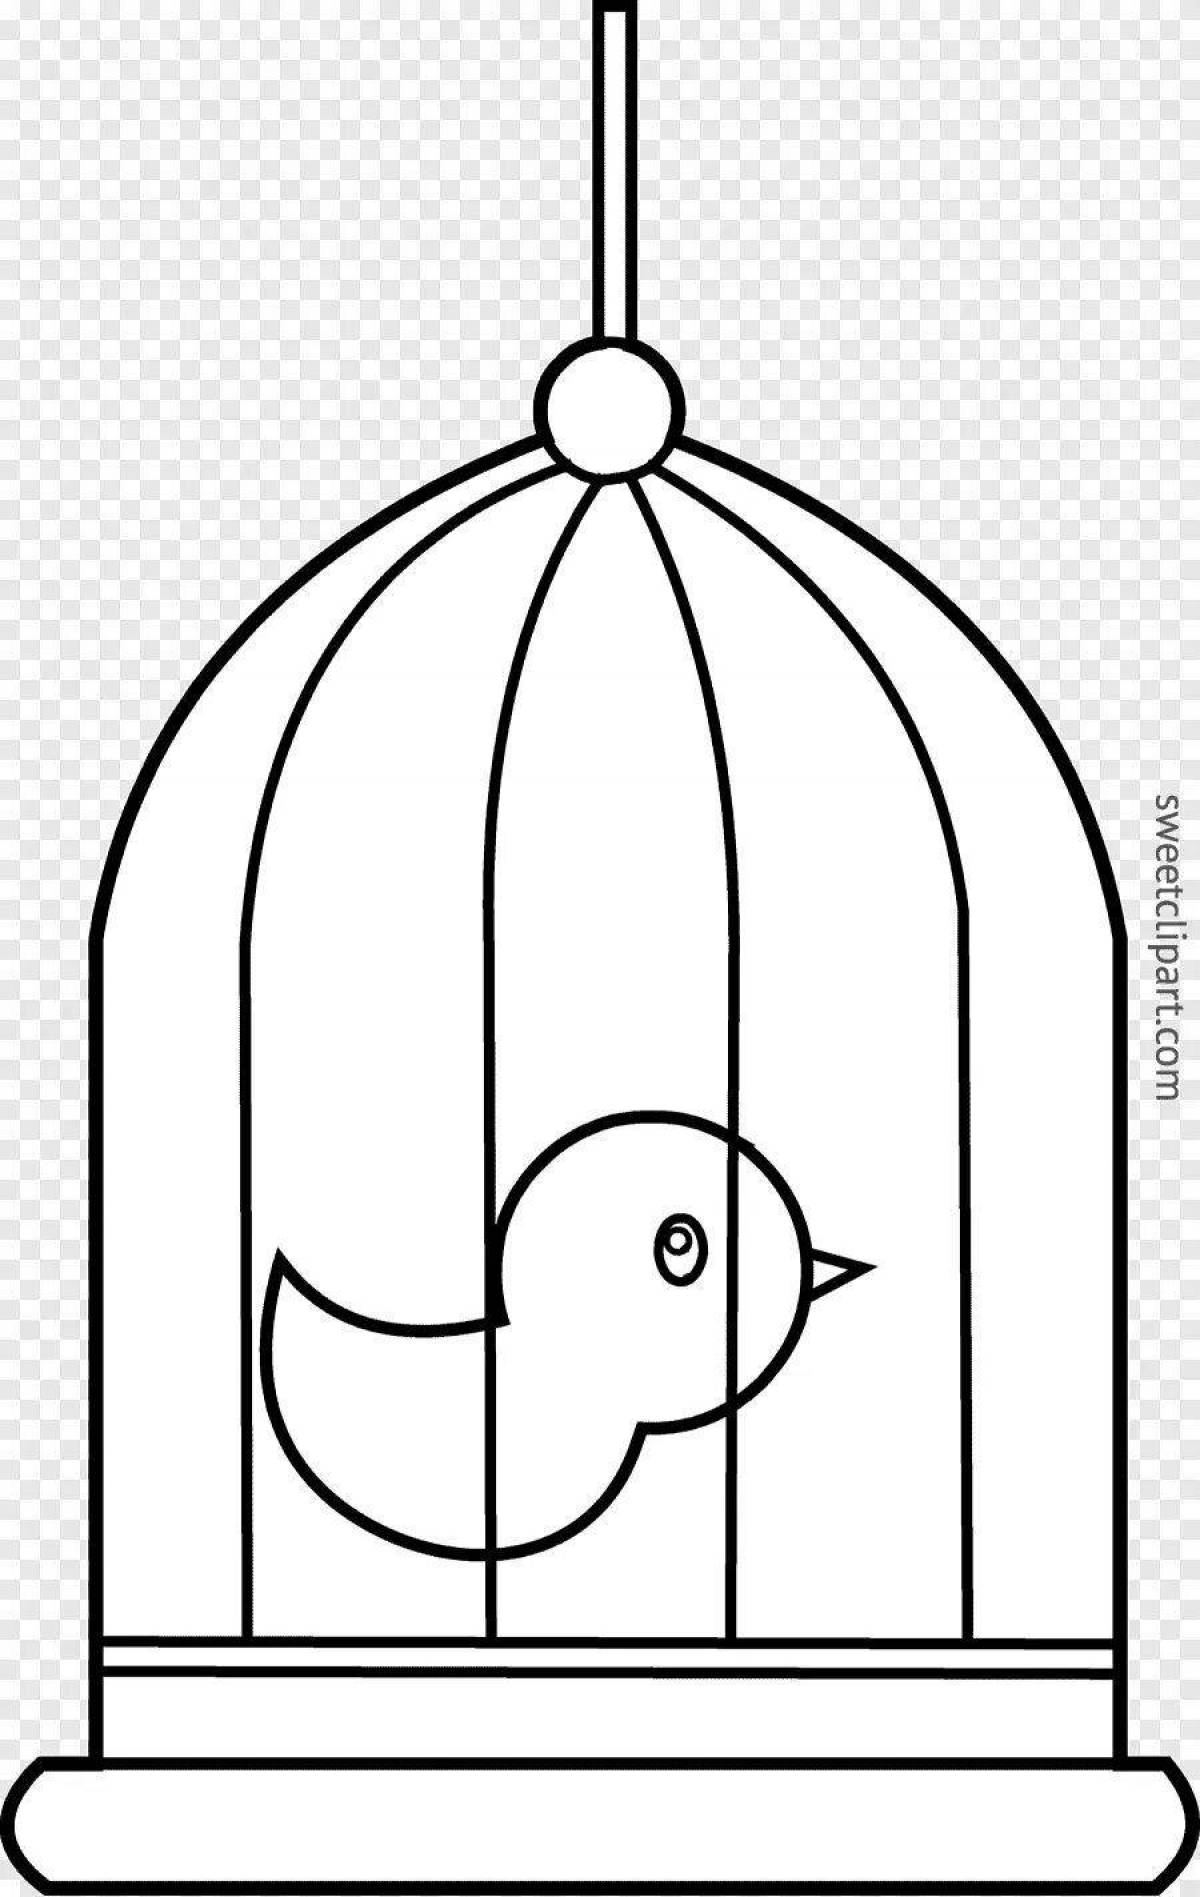 Playful cage coloring page for kids